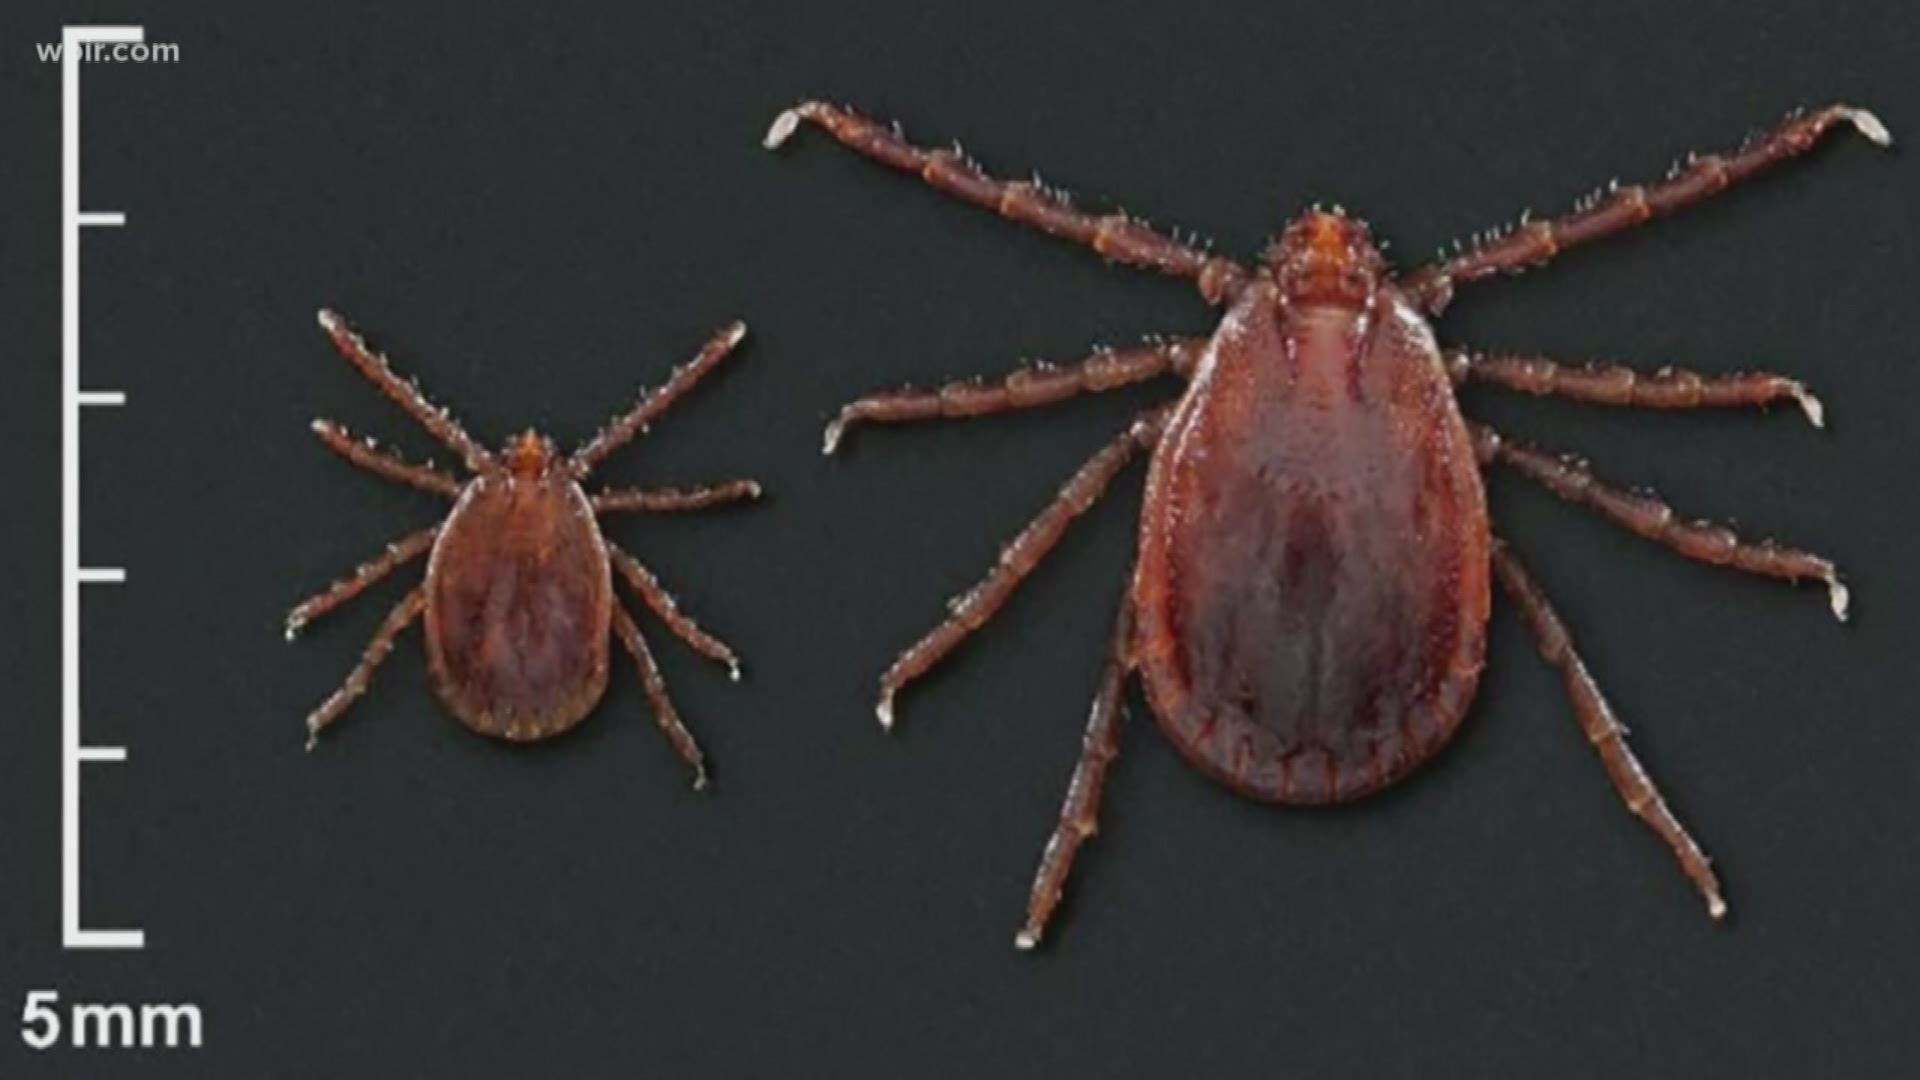 The University of Tennessee received $150,000 to study an invasive tick. The Asian longhorned tick is now in 12 states -- including Tennessee.